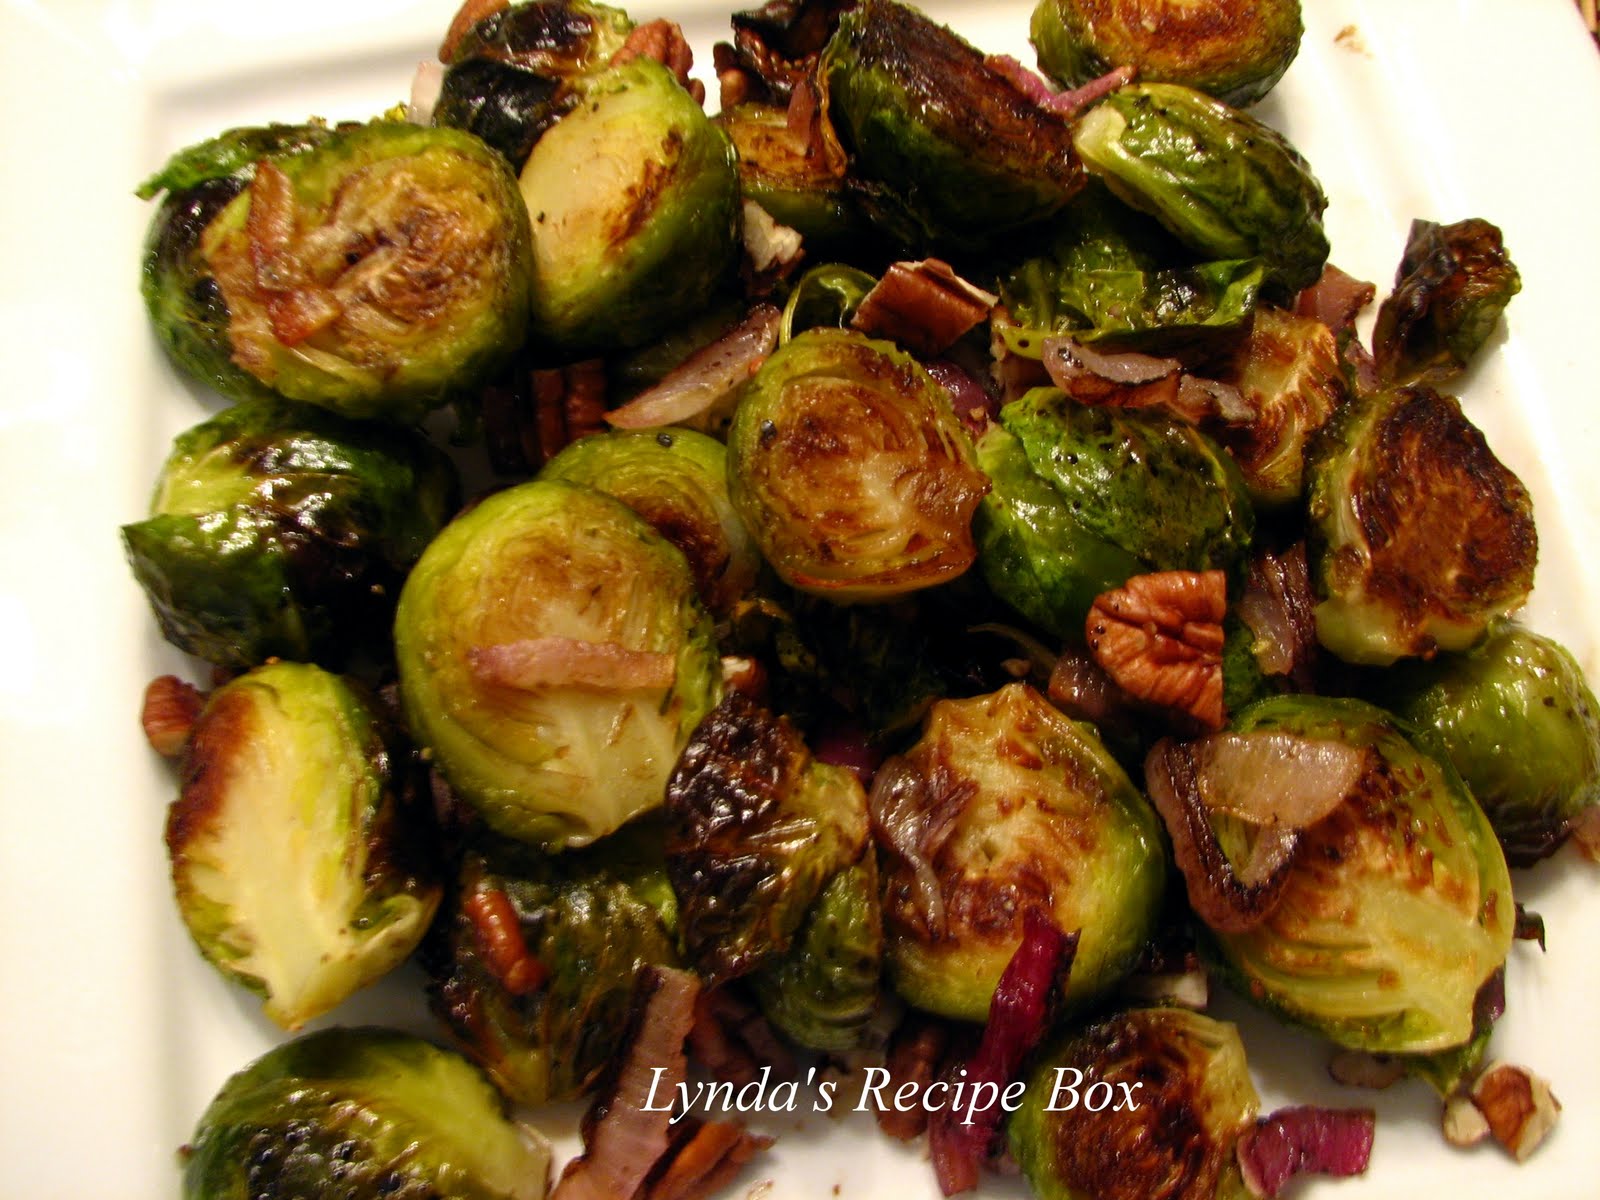 Lynda's Recipe Box Roasted Brussels Sprouts with Balsamic